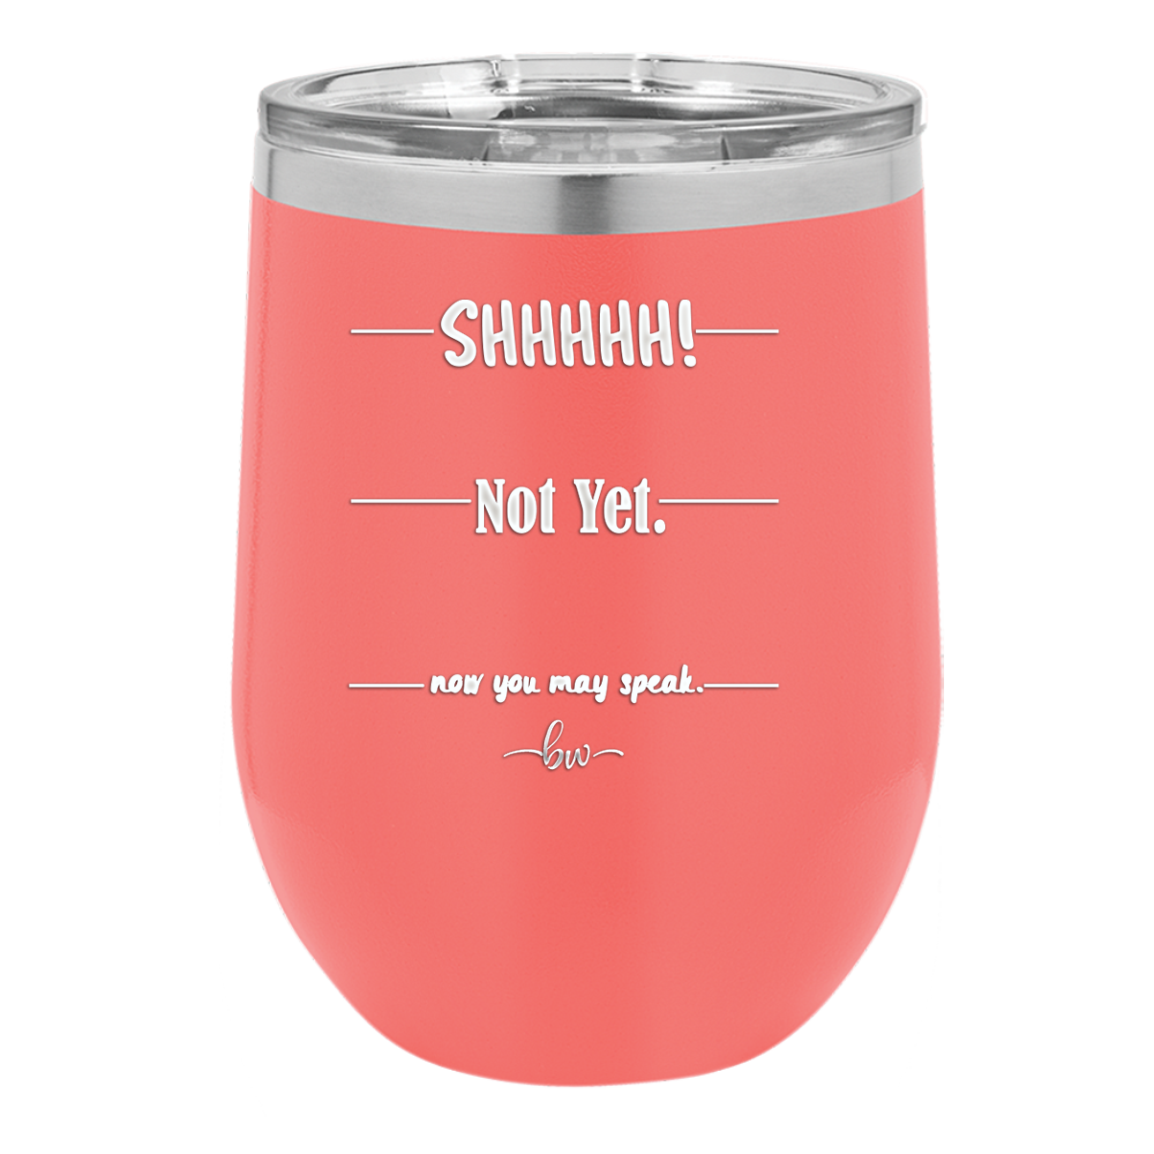 Shhh. Not Yet. Now You May Speak. - Laser Engraved Stainless Steel Drinkware - 1128 -